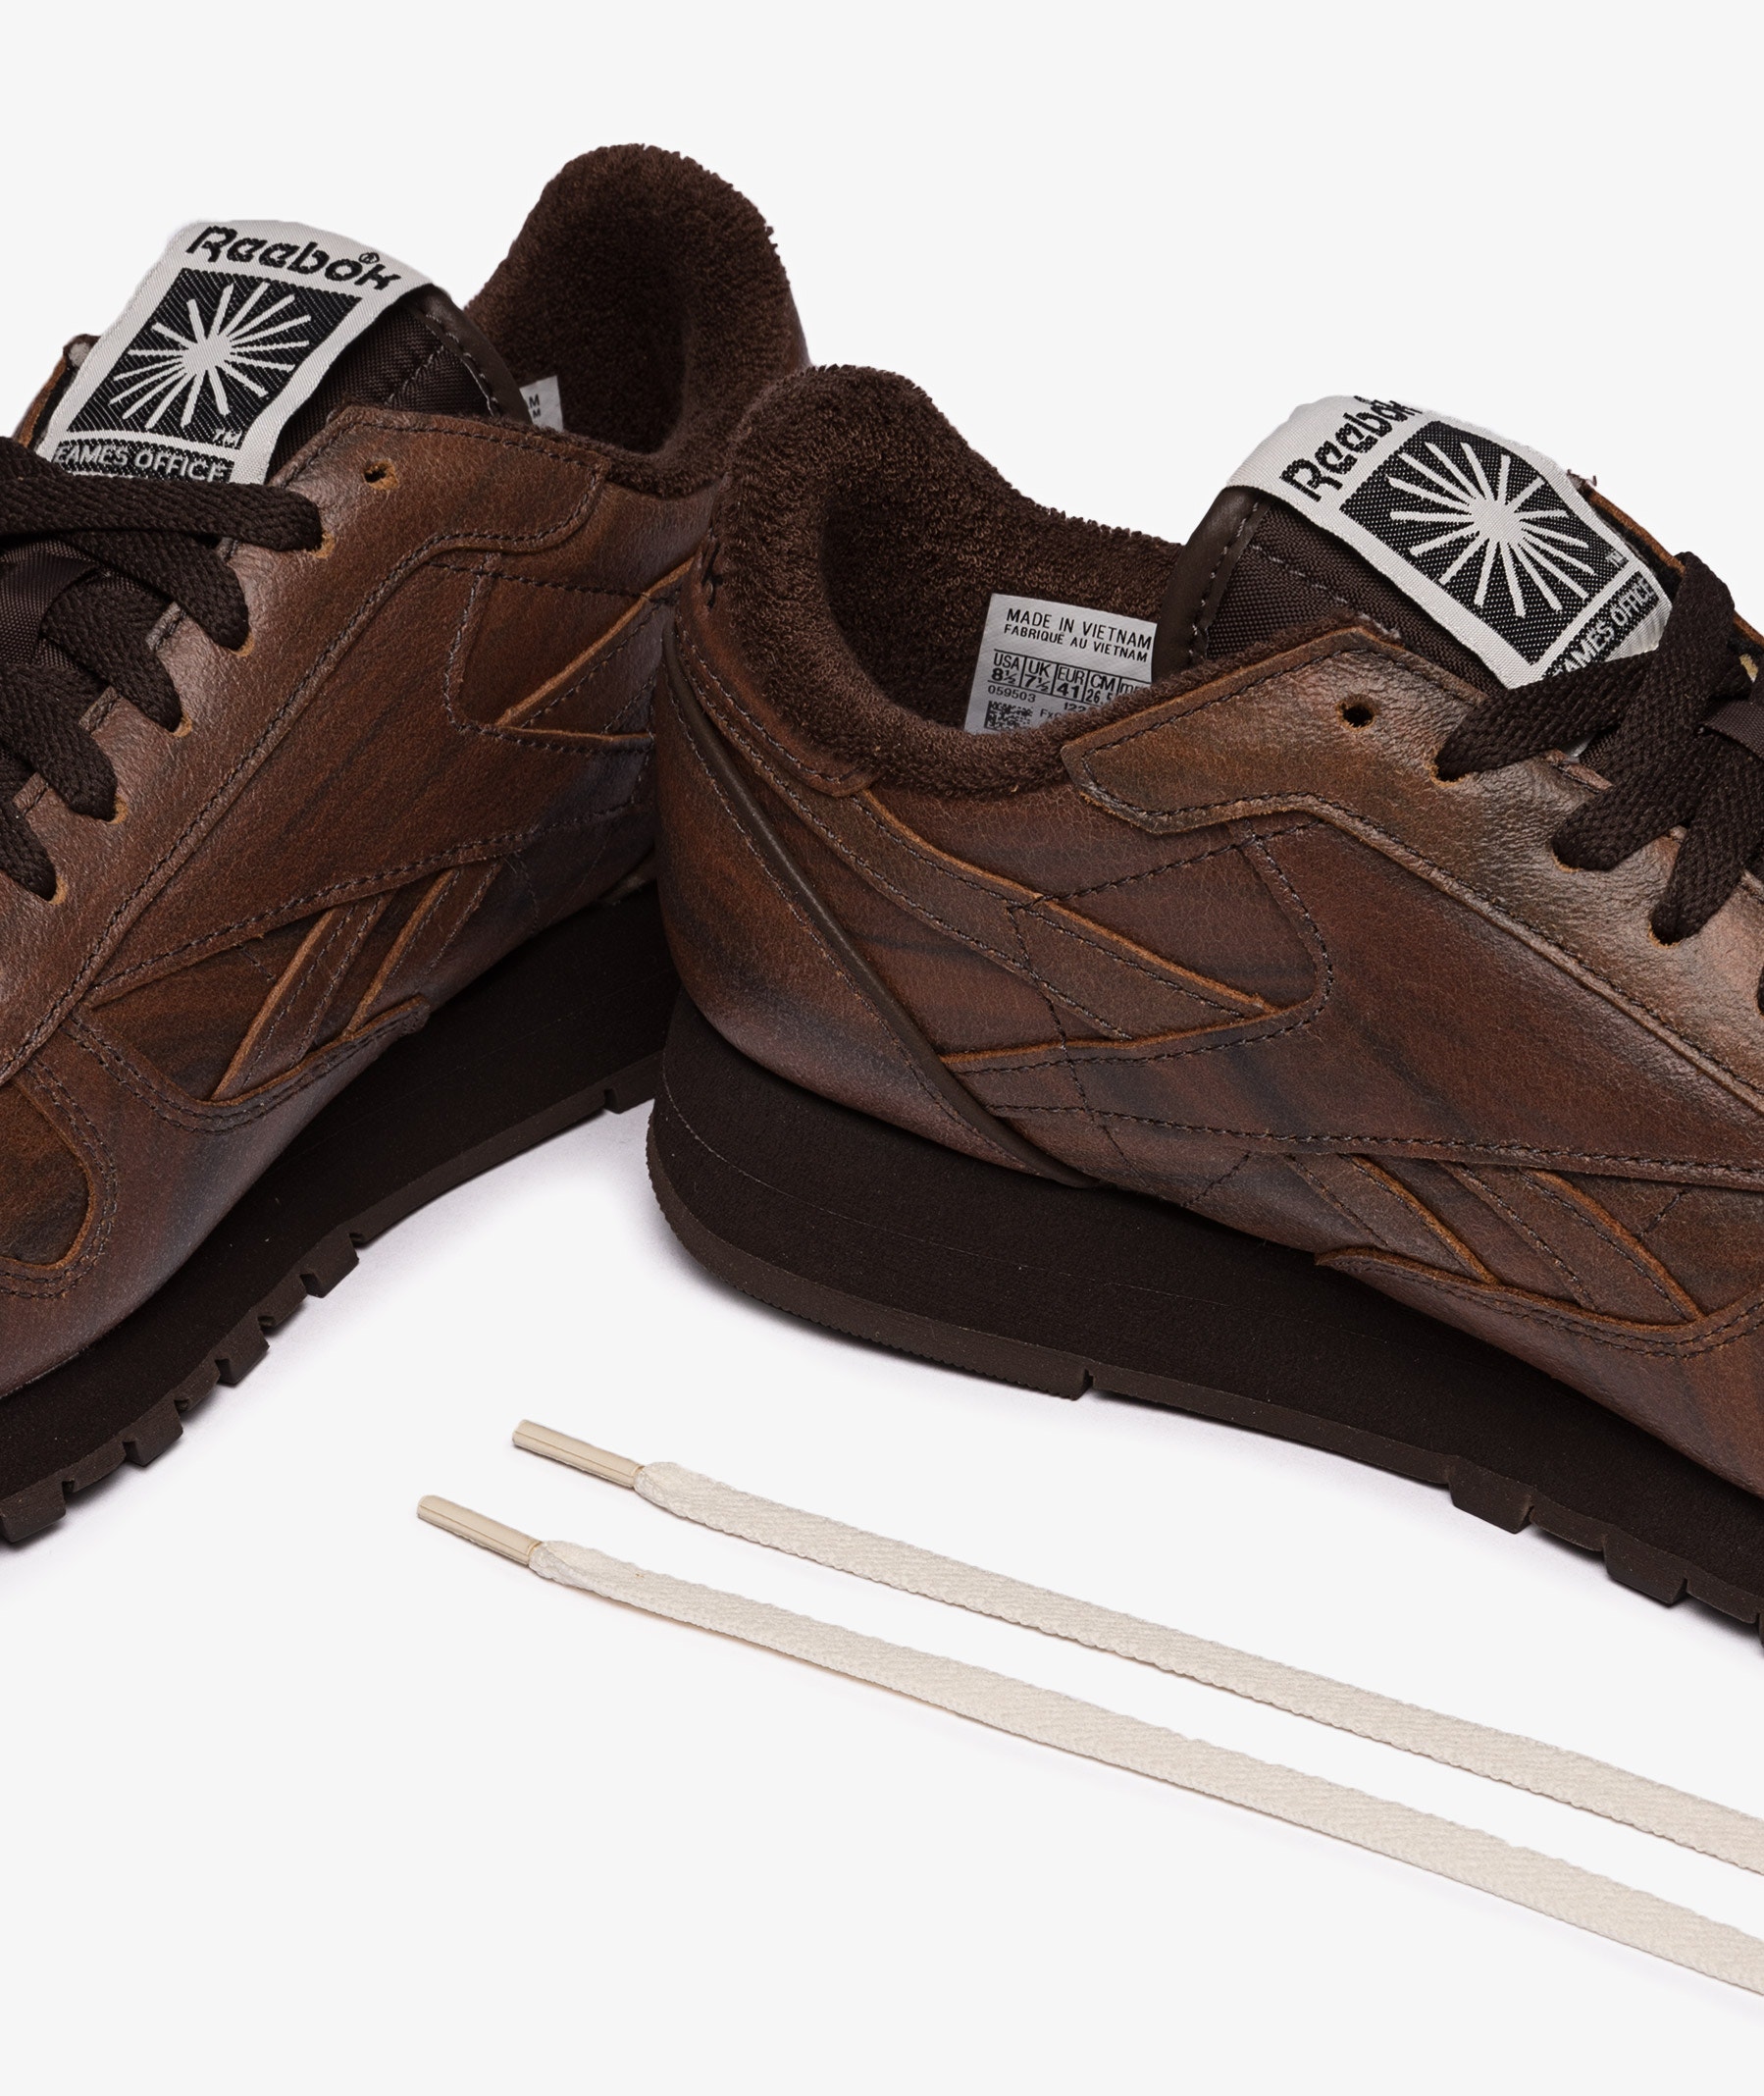 Sale Reebok Classic Leather x Eames House Sale Online - Best Price